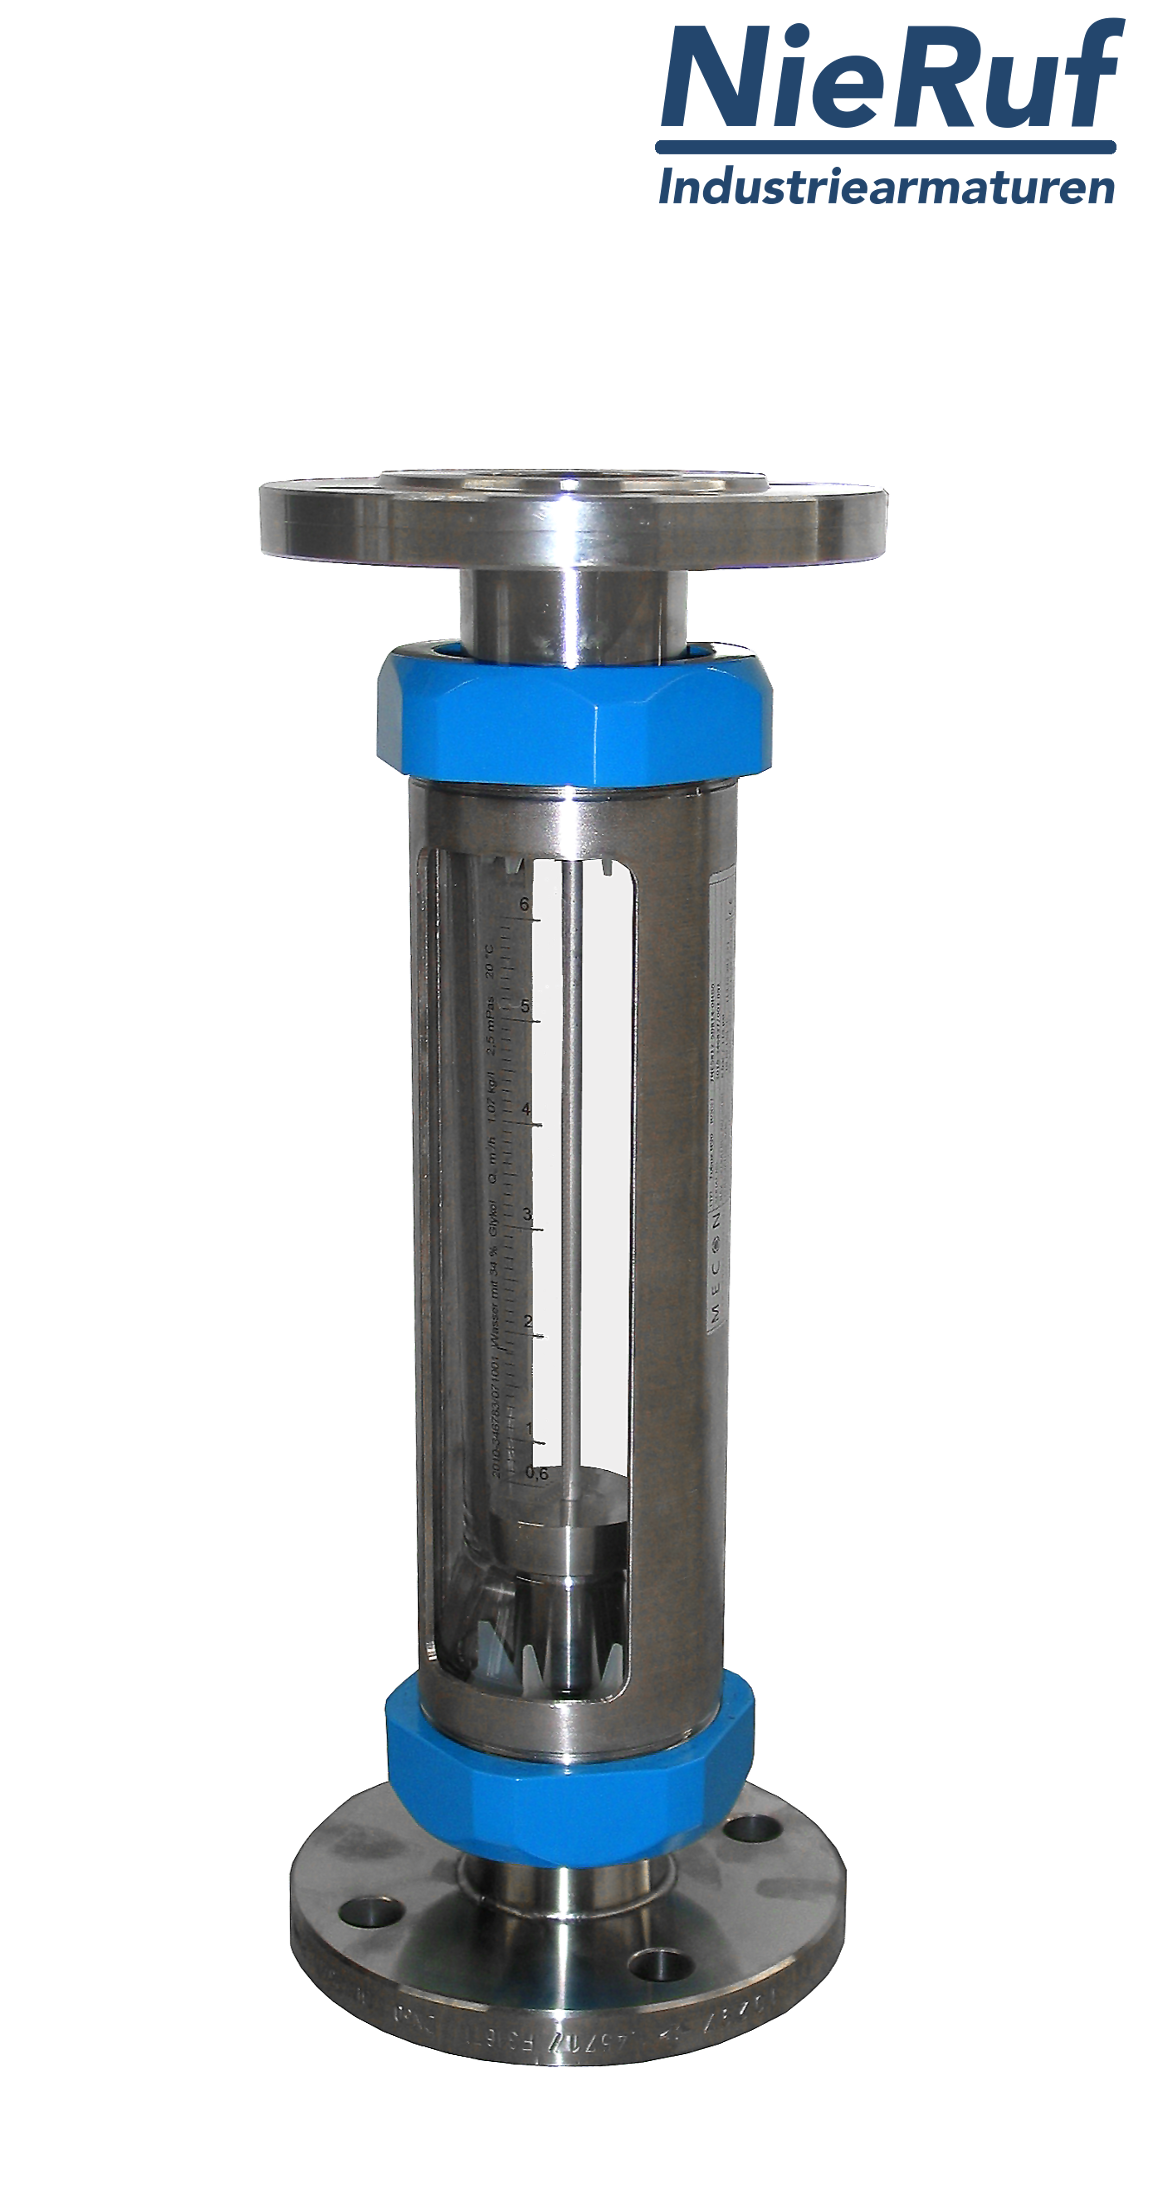 Variable area flowmeter stainless steel + borosilicate flange DN10 25.0 - 250 l/h water FKM